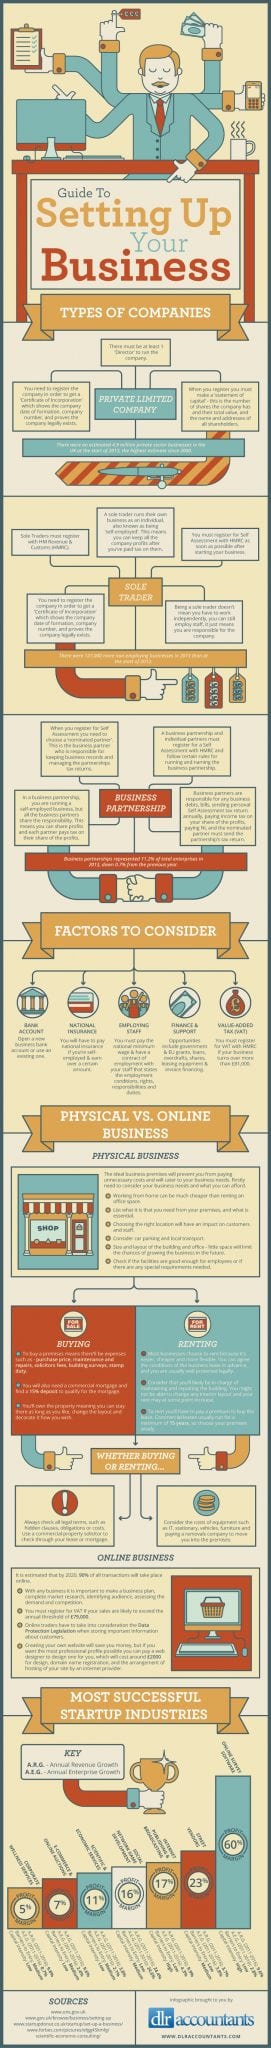 DLR-business-guide infographic